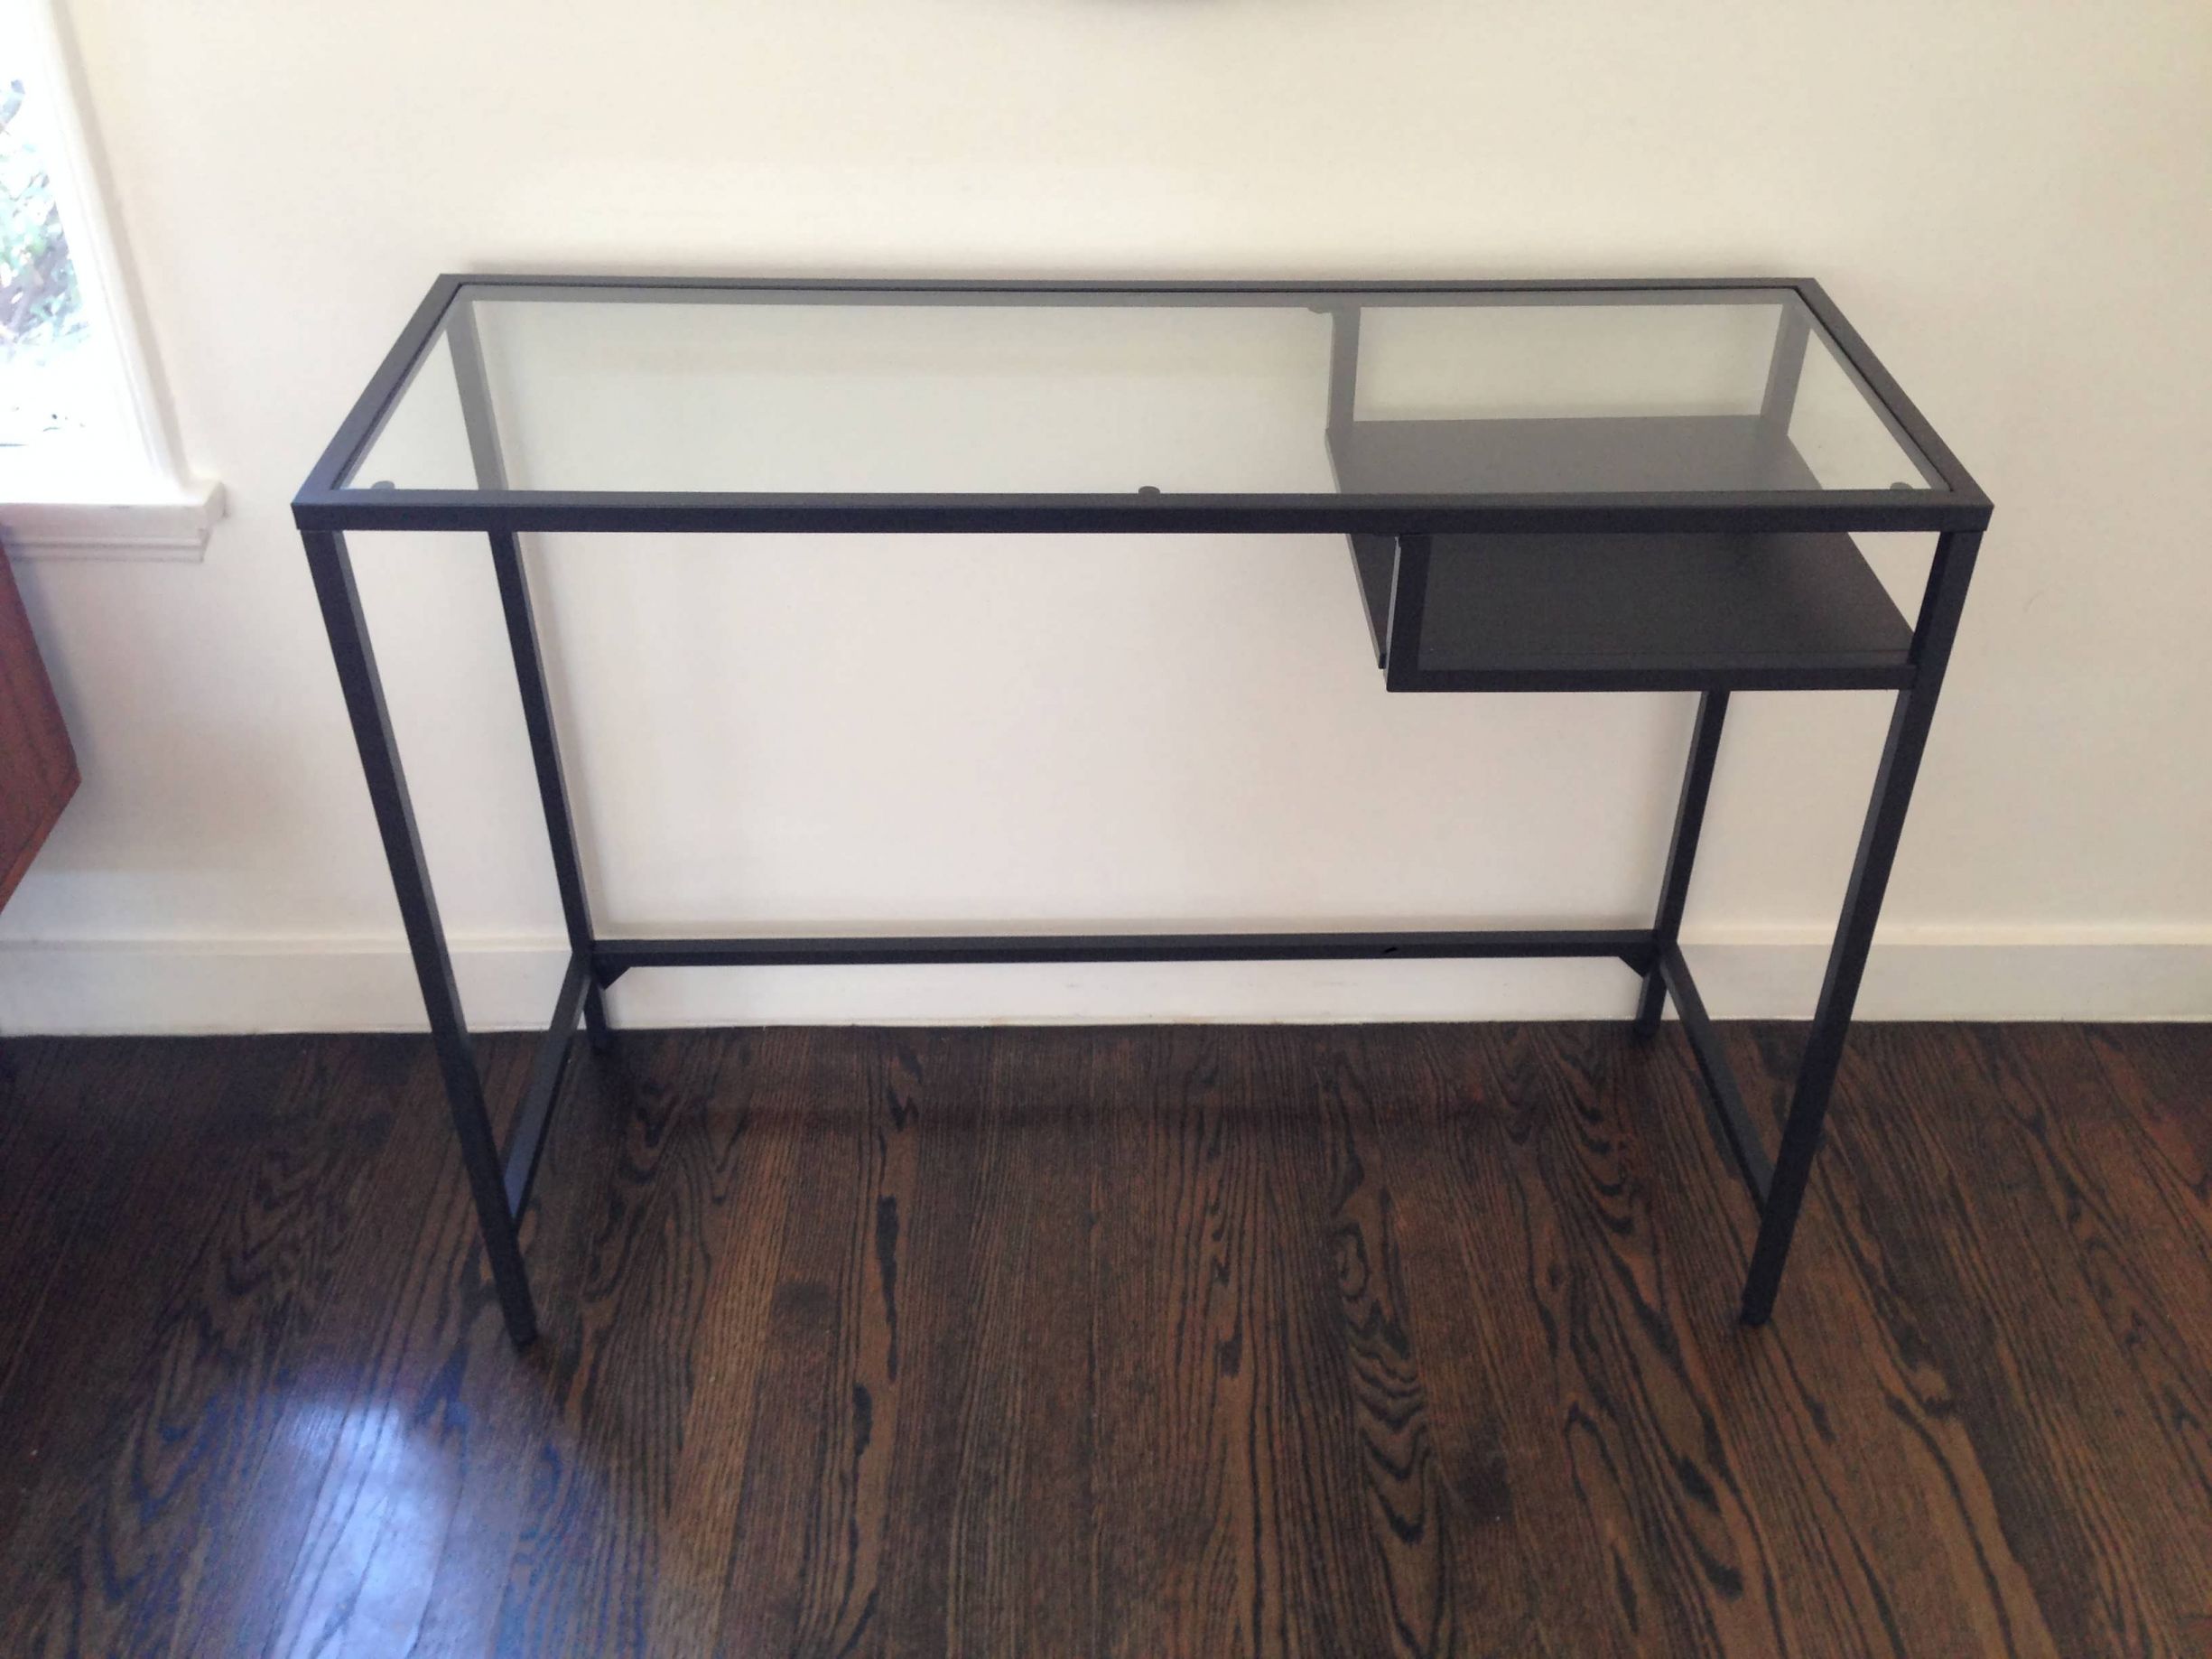 Ikea Desk Glass Top Organization Ideas For Small Check End Table